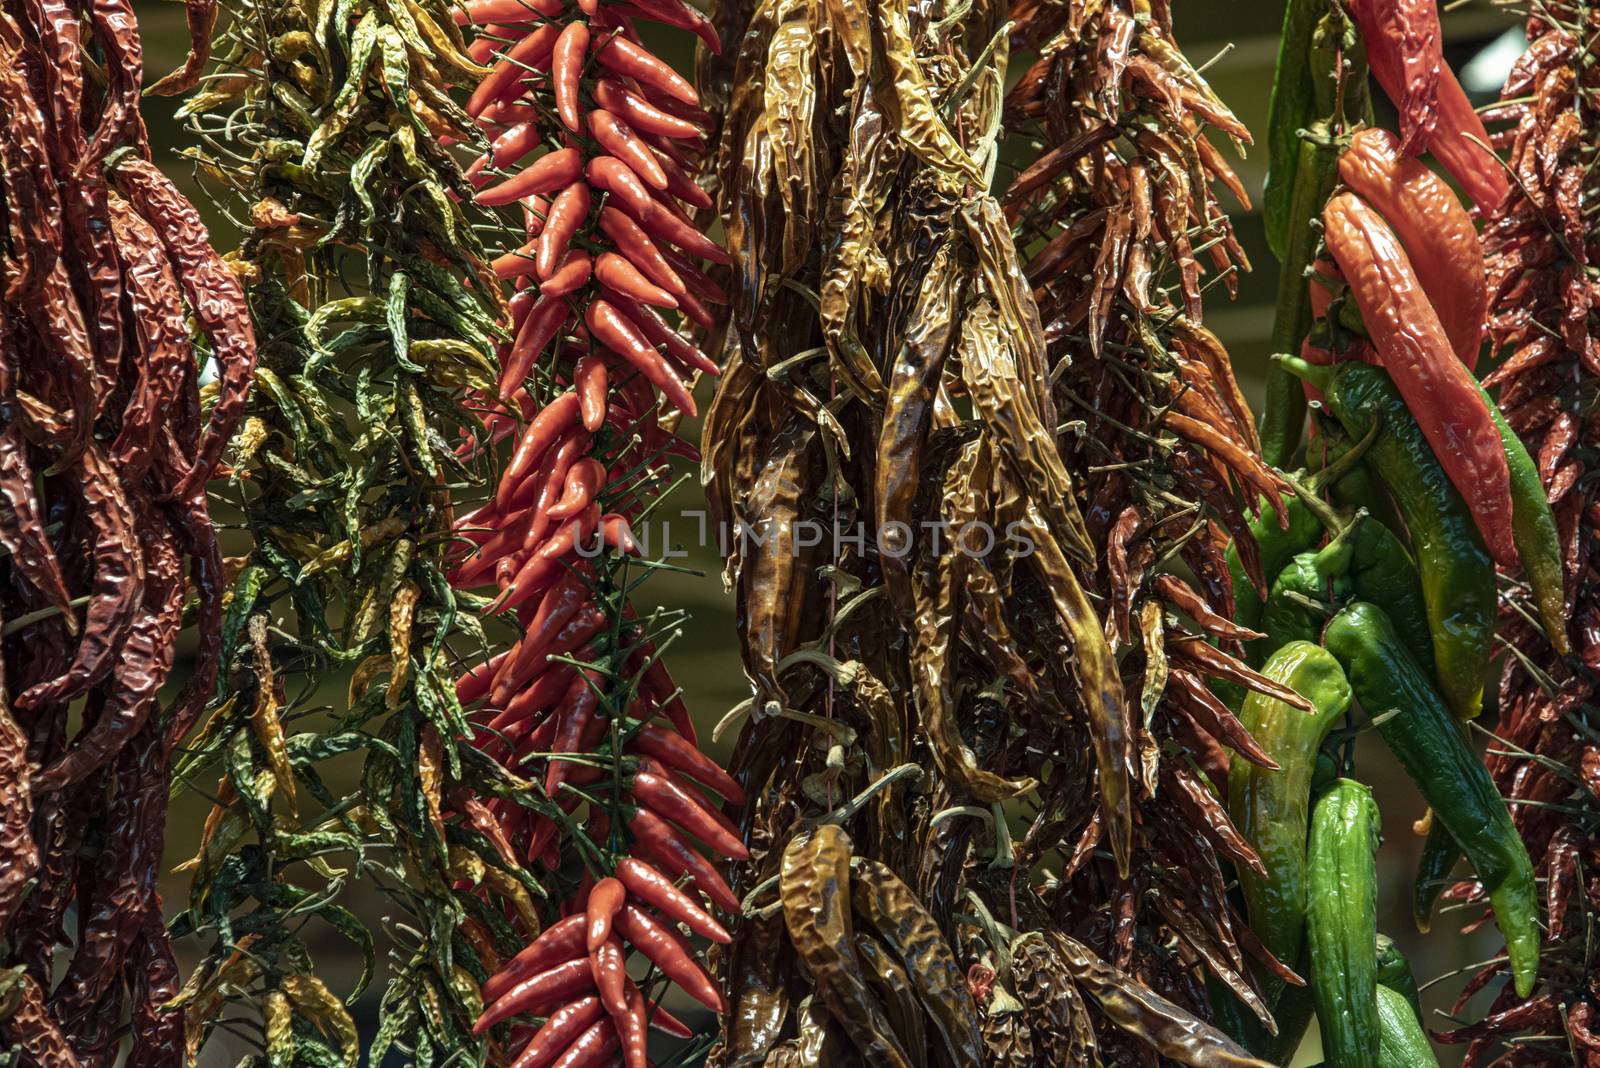 Spain, Barcelona - May 2018: hanging chains of dried chillies